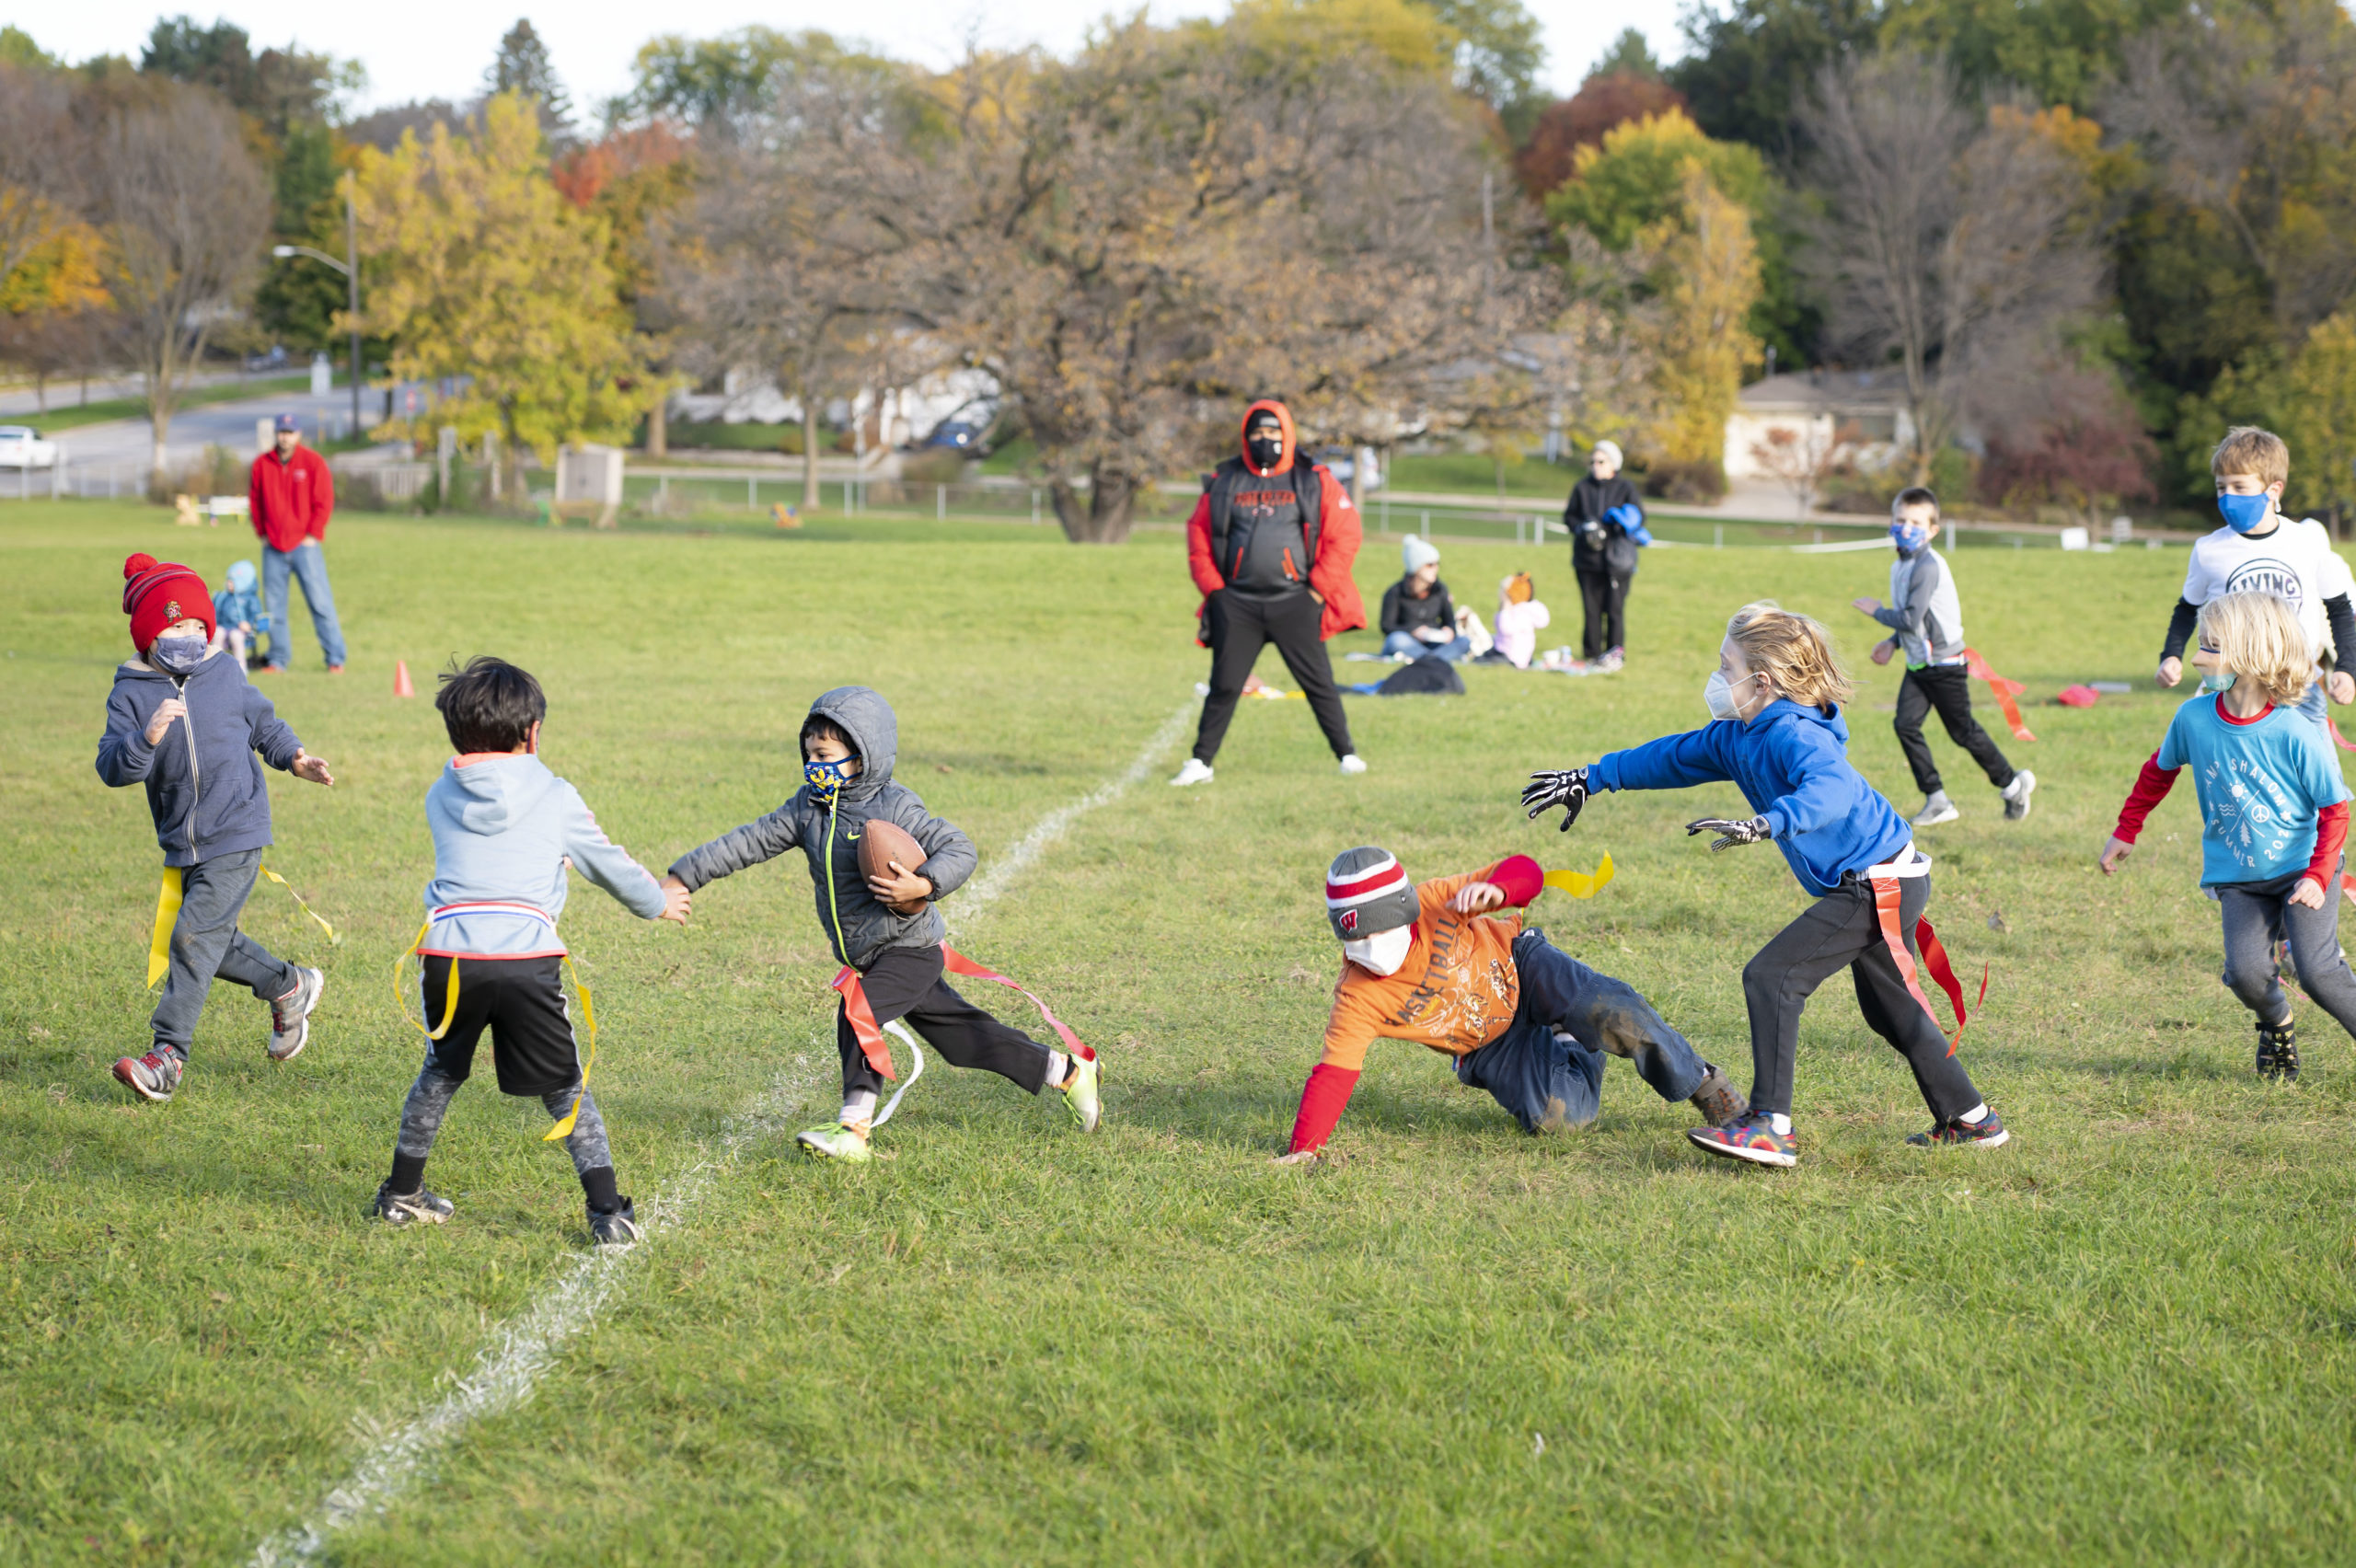 A group of young kids playing football on a field in early fall